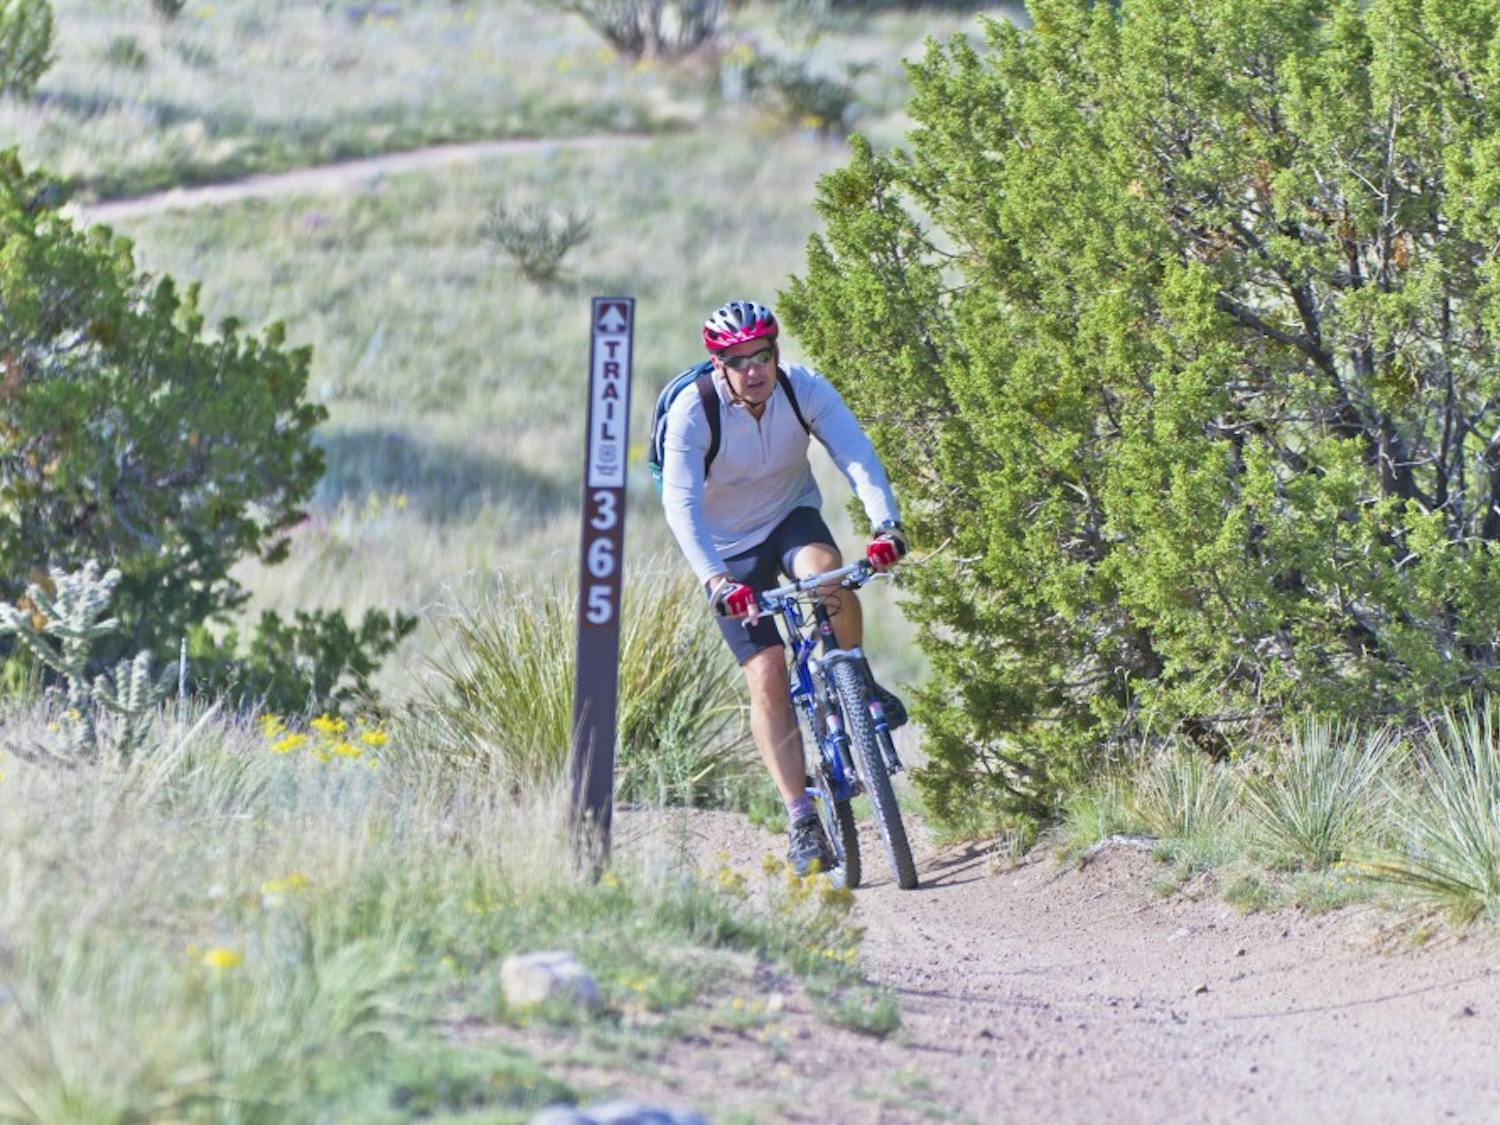 Michael Recker seen here riding the trails of Elena Gallegos recreation site in the Sandia Mountain foothills Saturday morning. Recker says this is amongst one of the top locations offered along the Sandia Mountains. Its location is close to the city and contains a very out of the city feel.